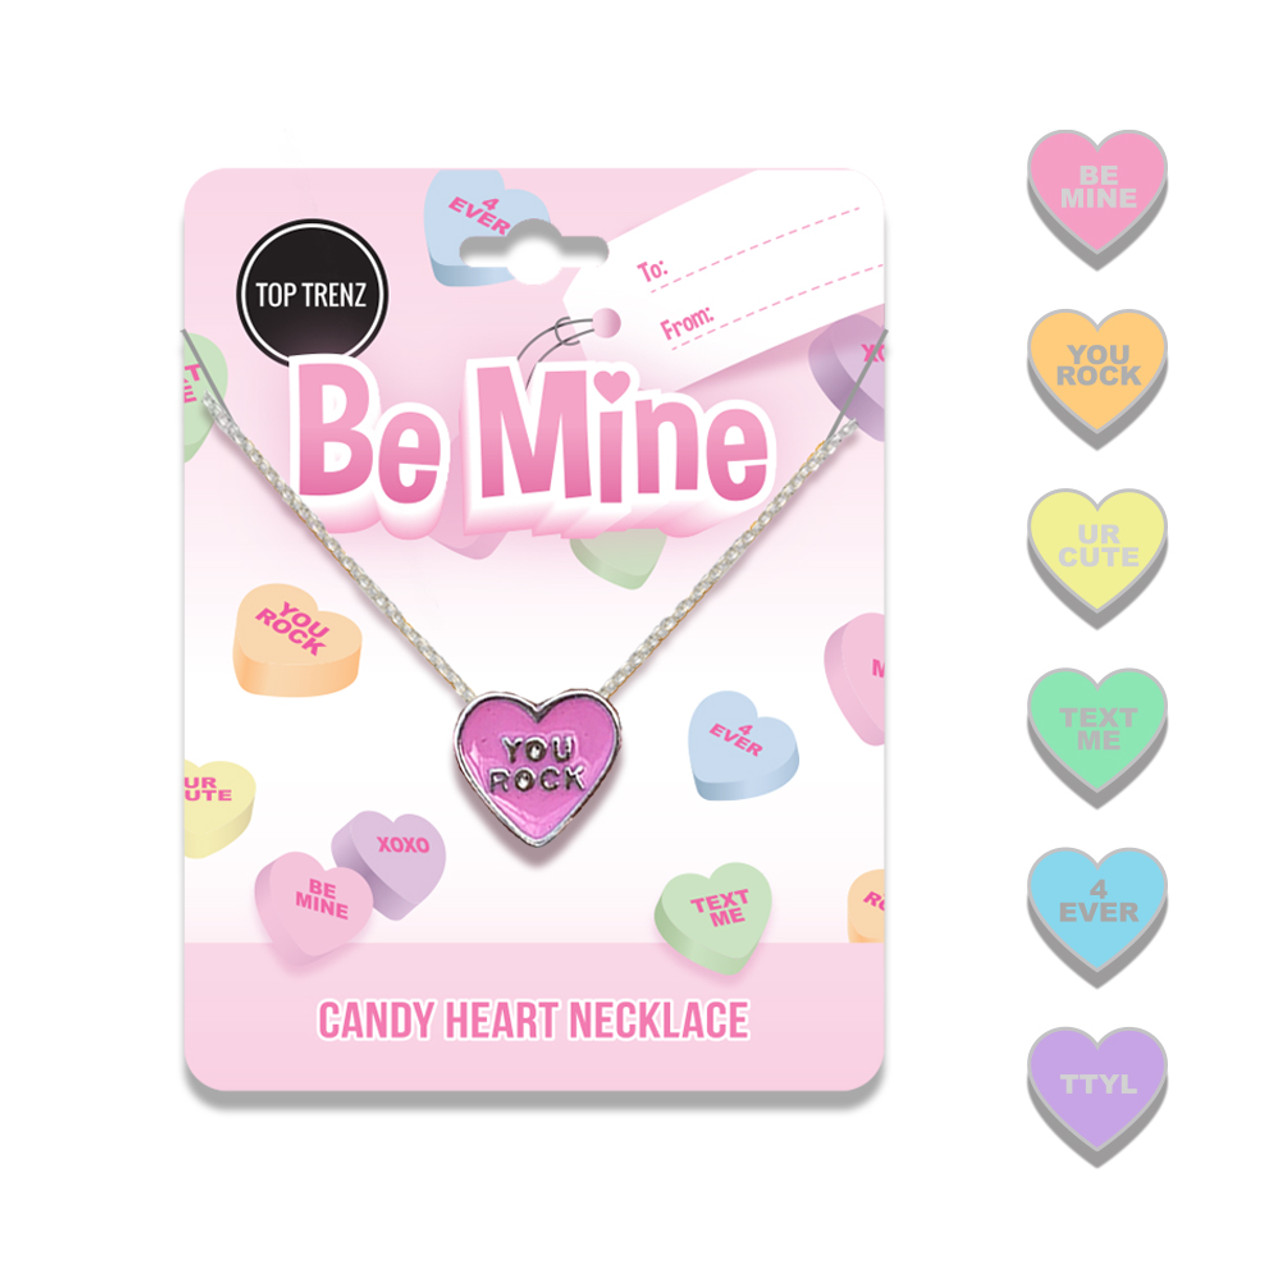 top trenz collection of heart shaped be mine conversation necklaces in packaging